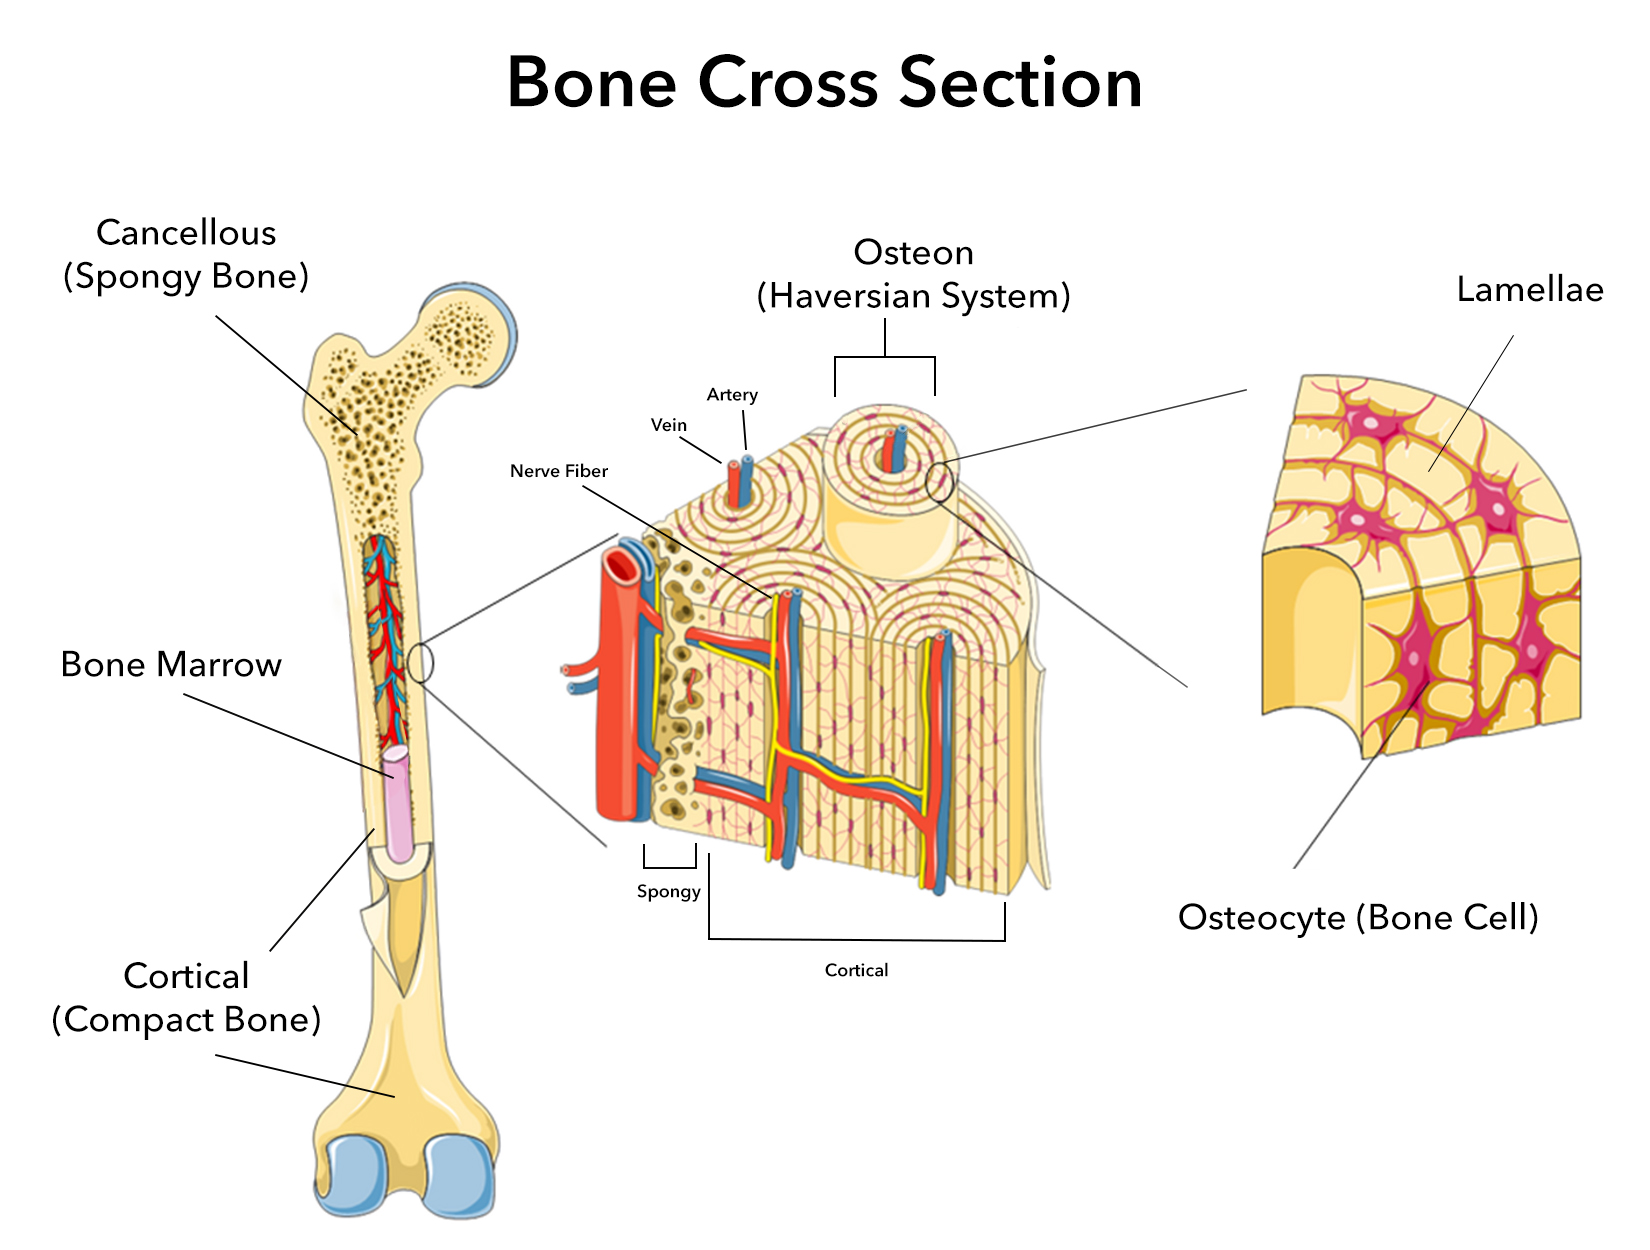 Cross section of a femur bone with close-ups of cancellous bone and cortical bone structures